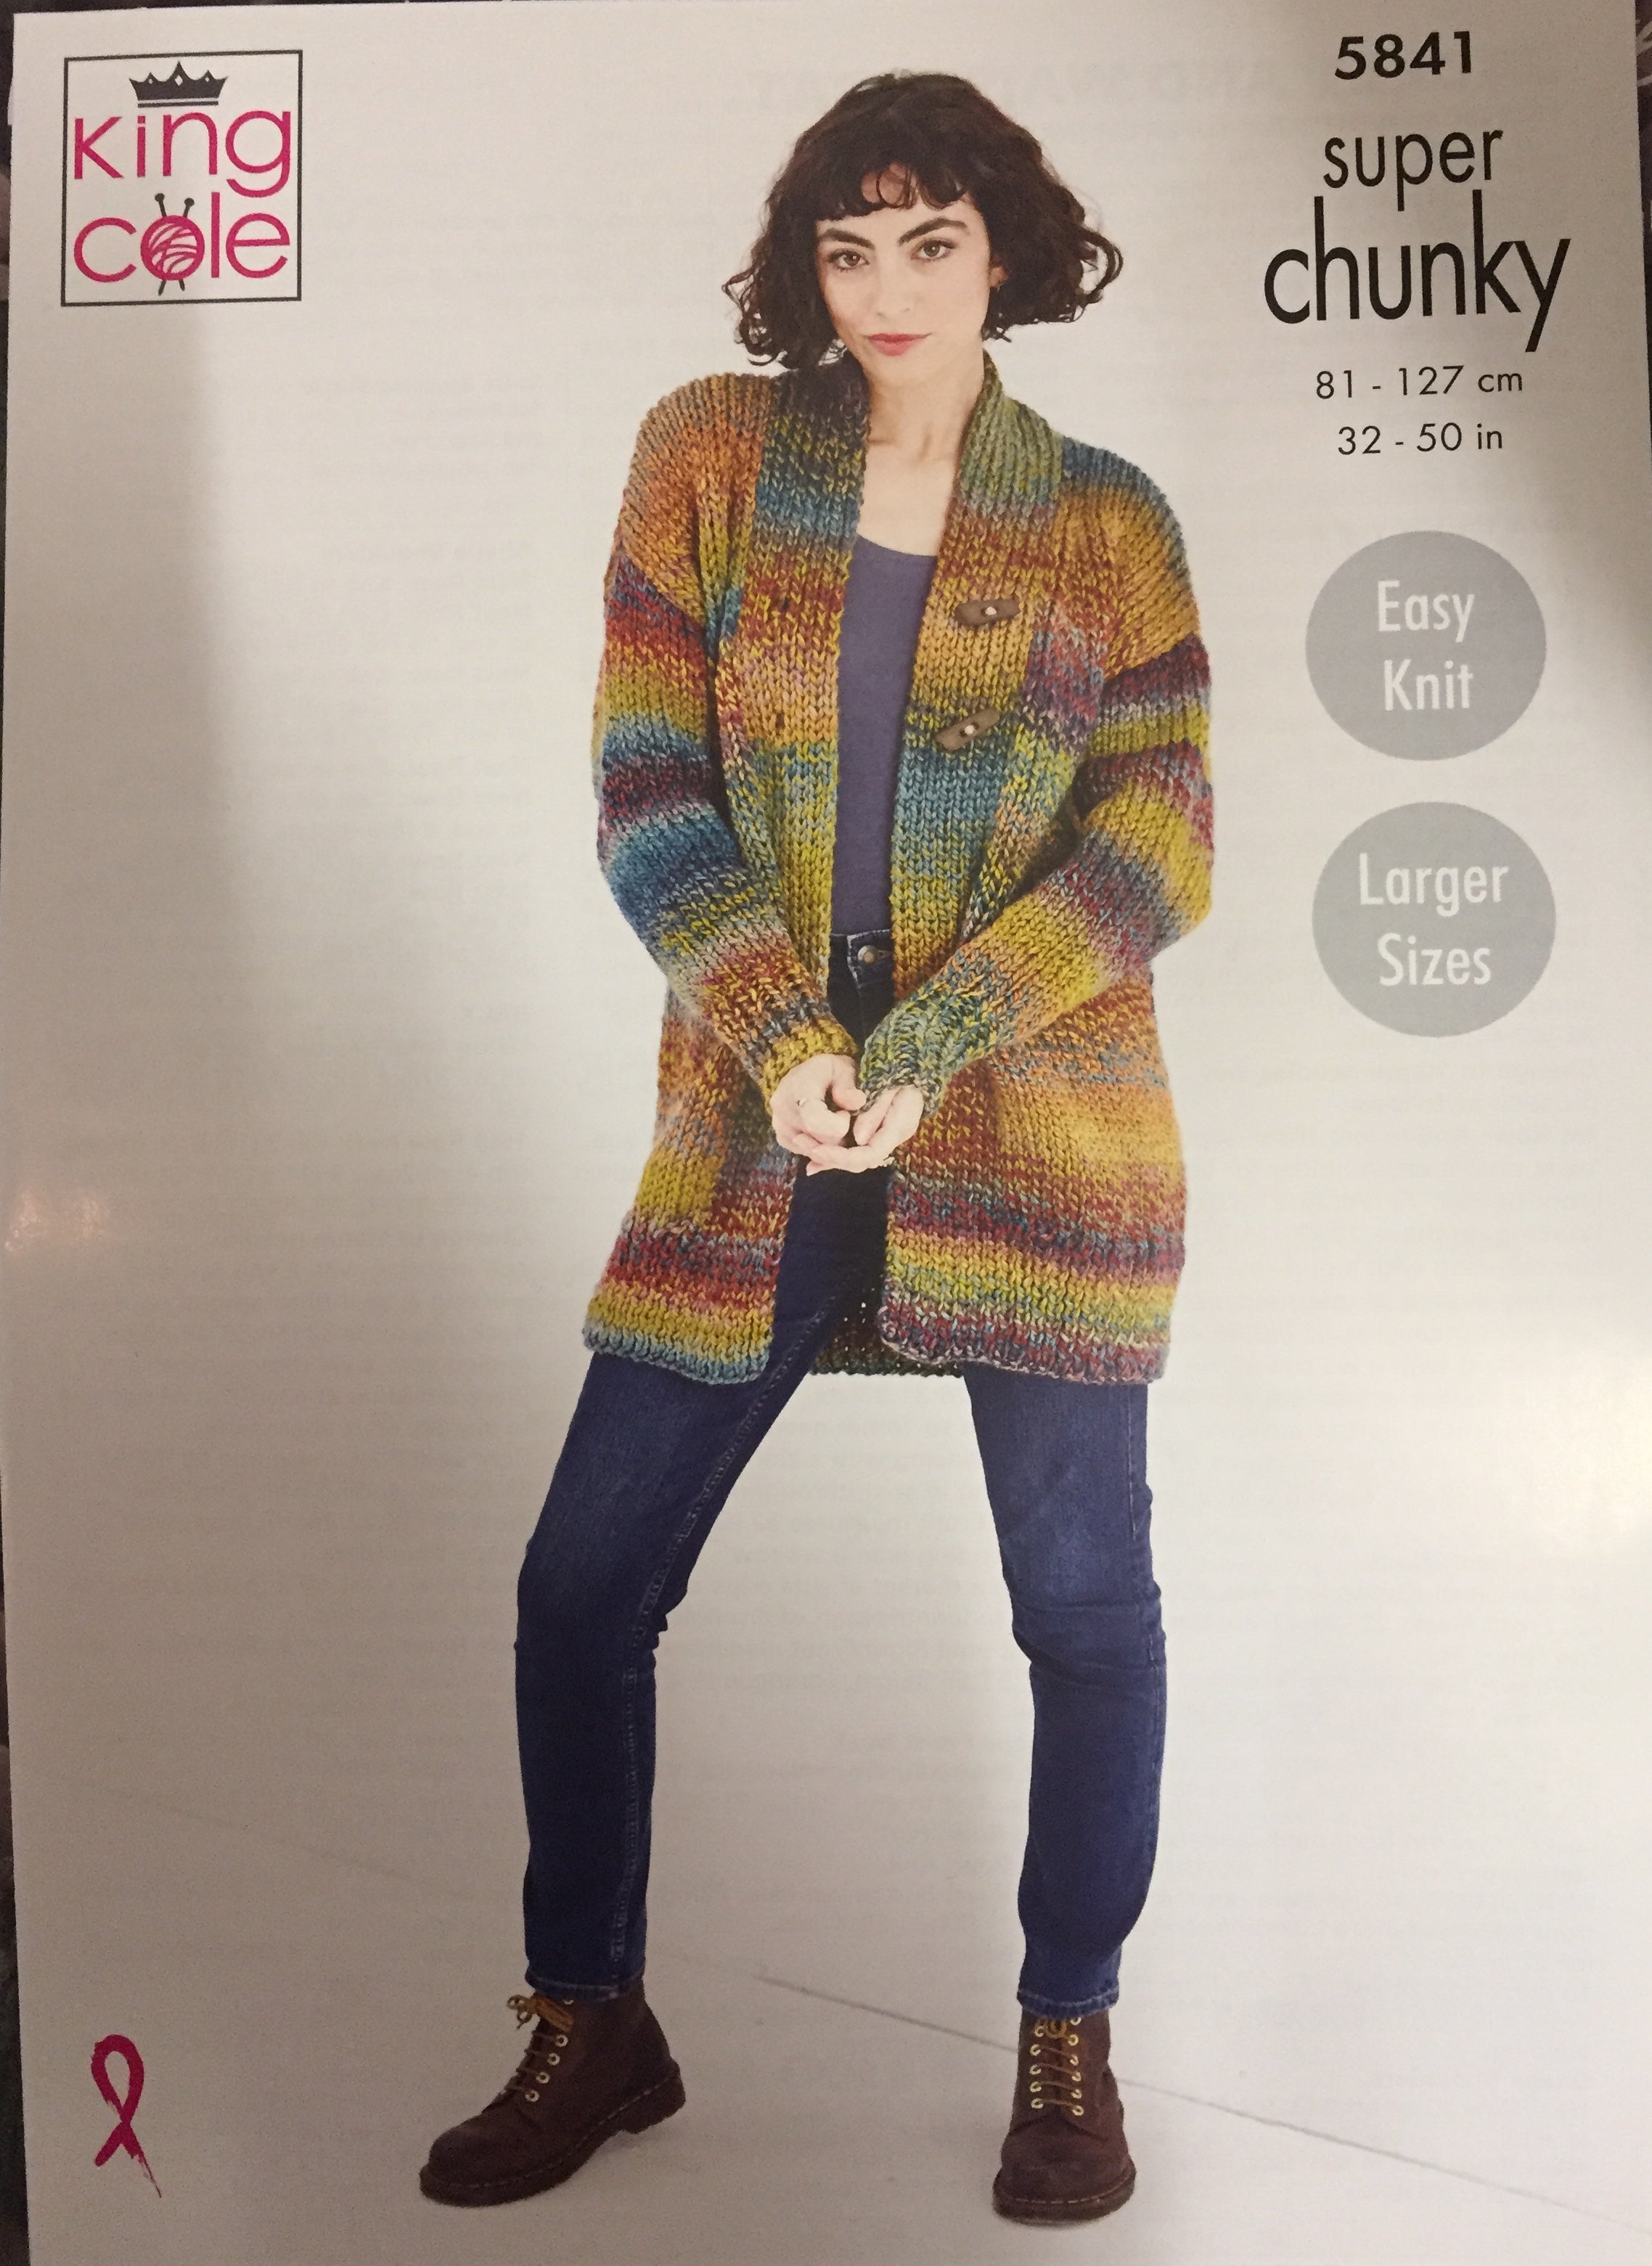 King Cole Pattern 5841 Jacket & Waistcoat Knitted in Explorer Super Chunky